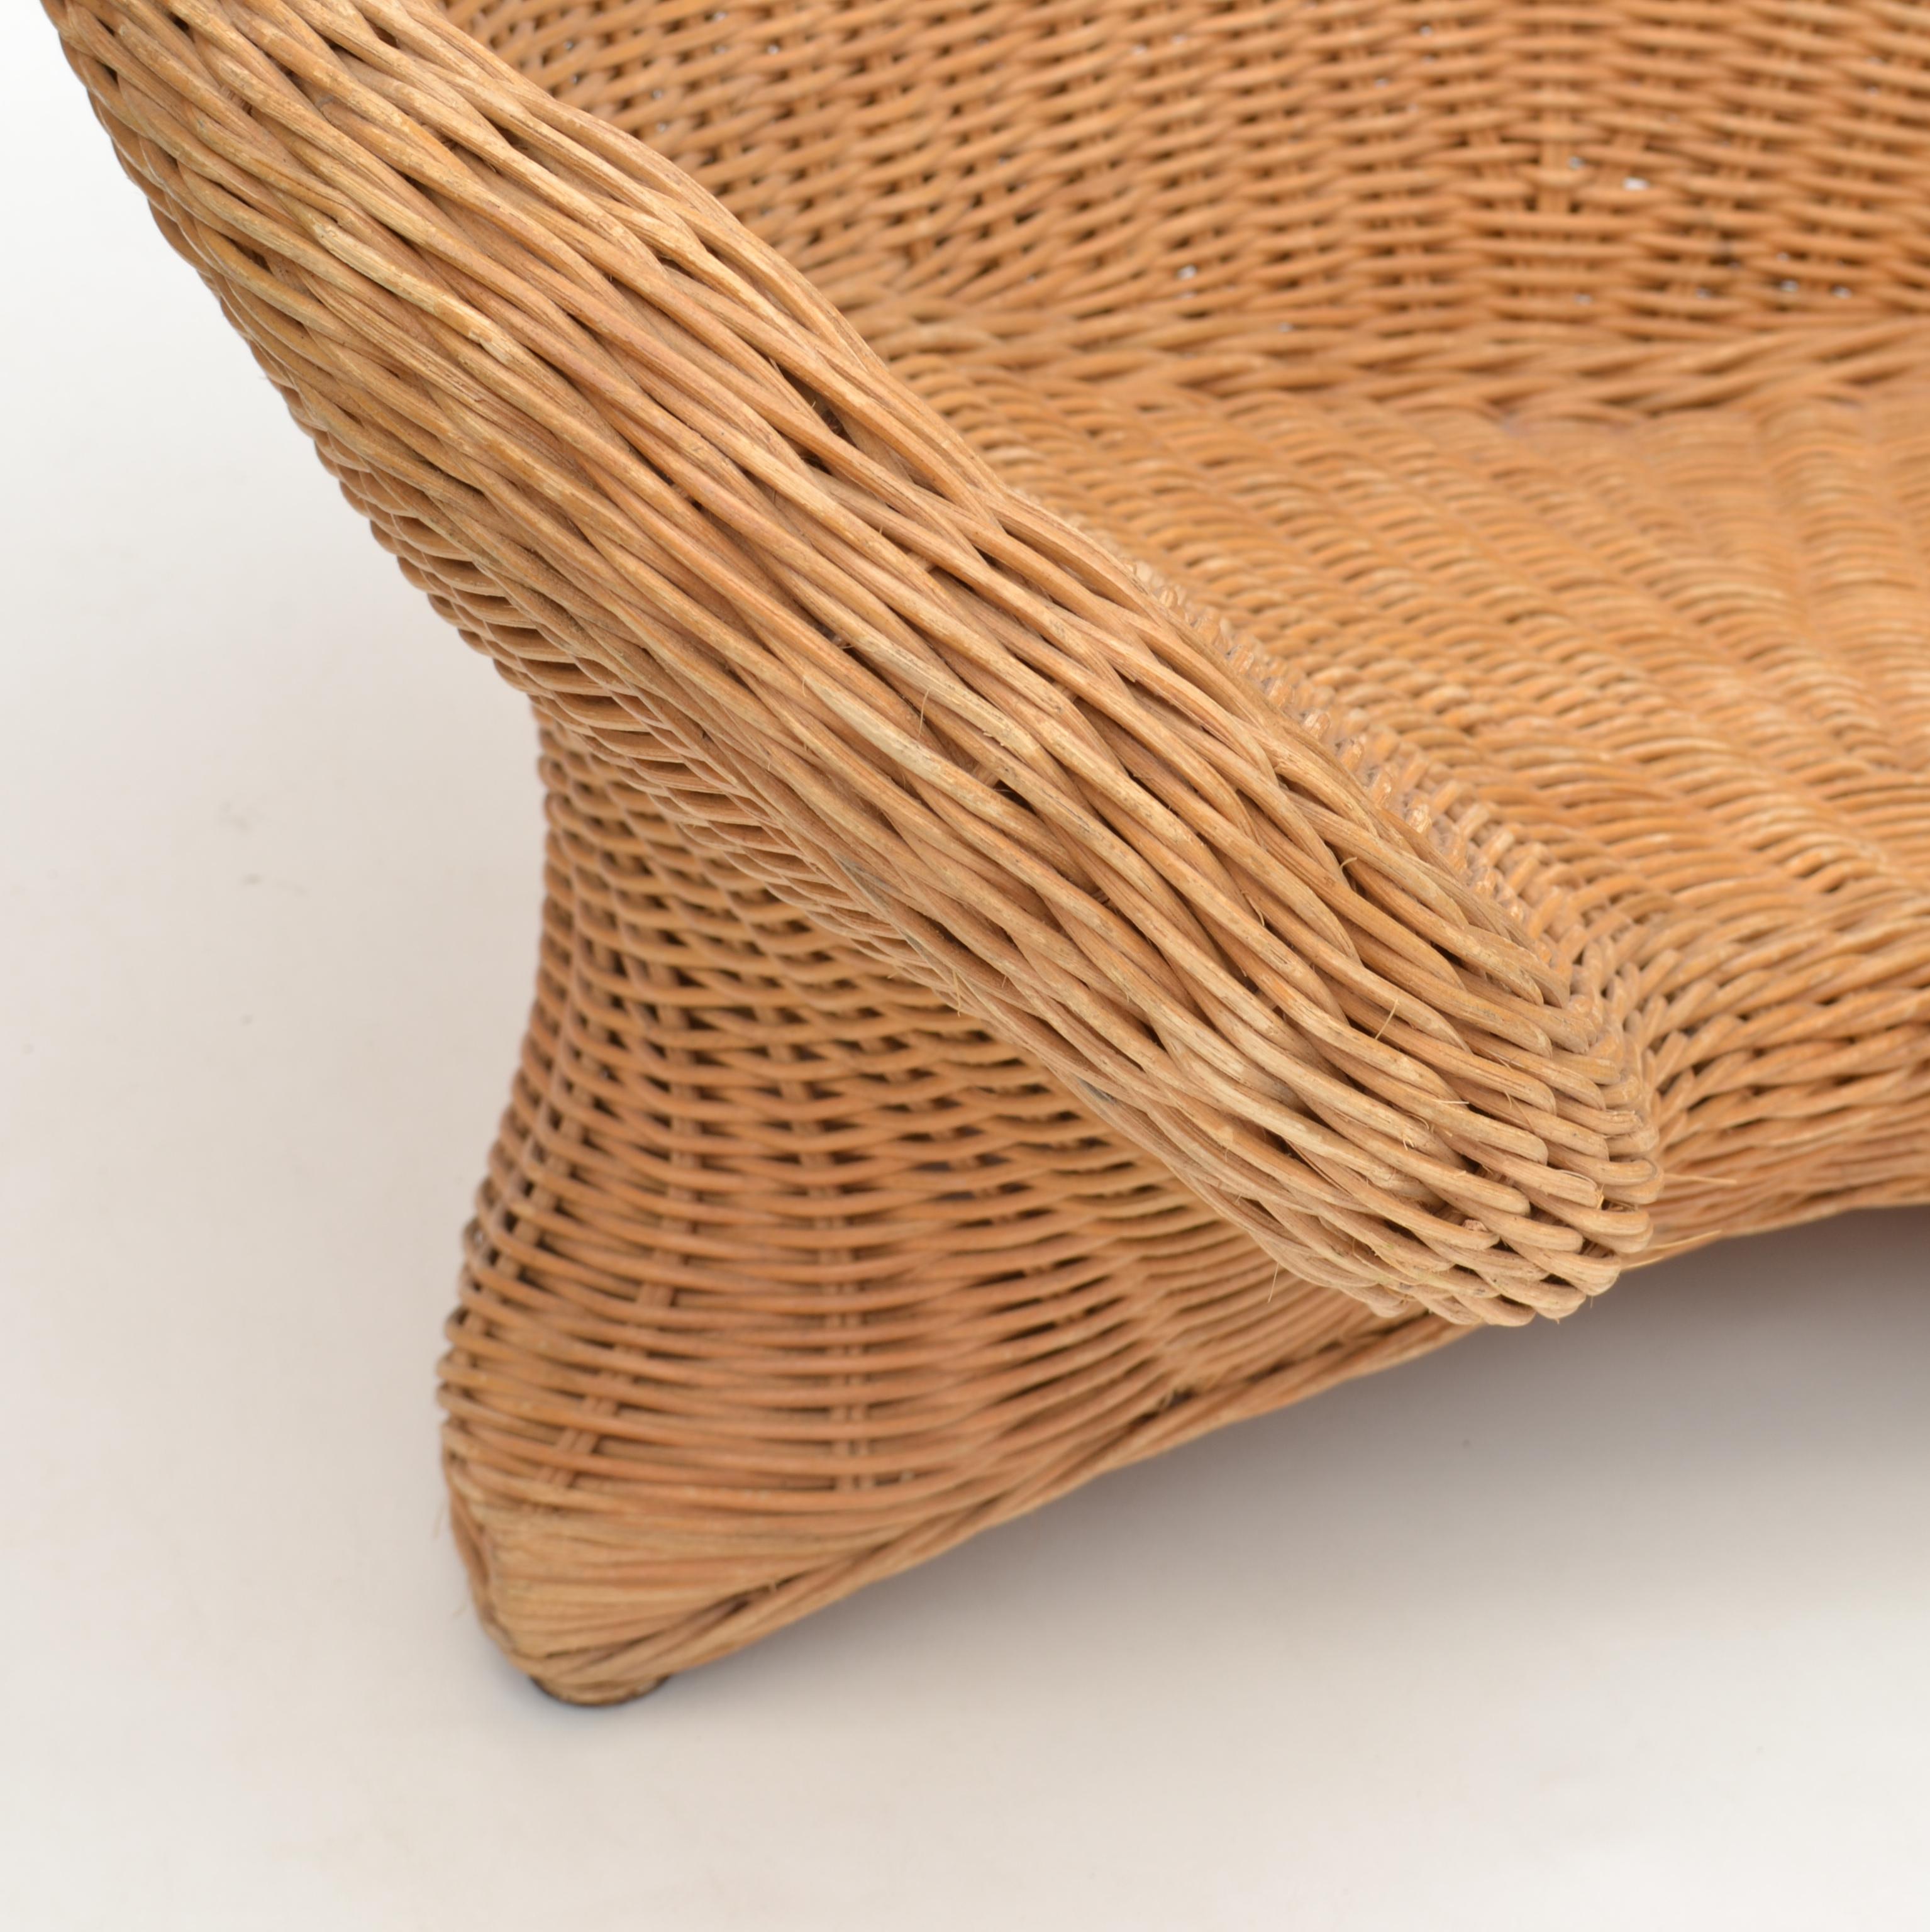 European Curvaceous Sculptural Cane Chair for Indoor or Outdoor